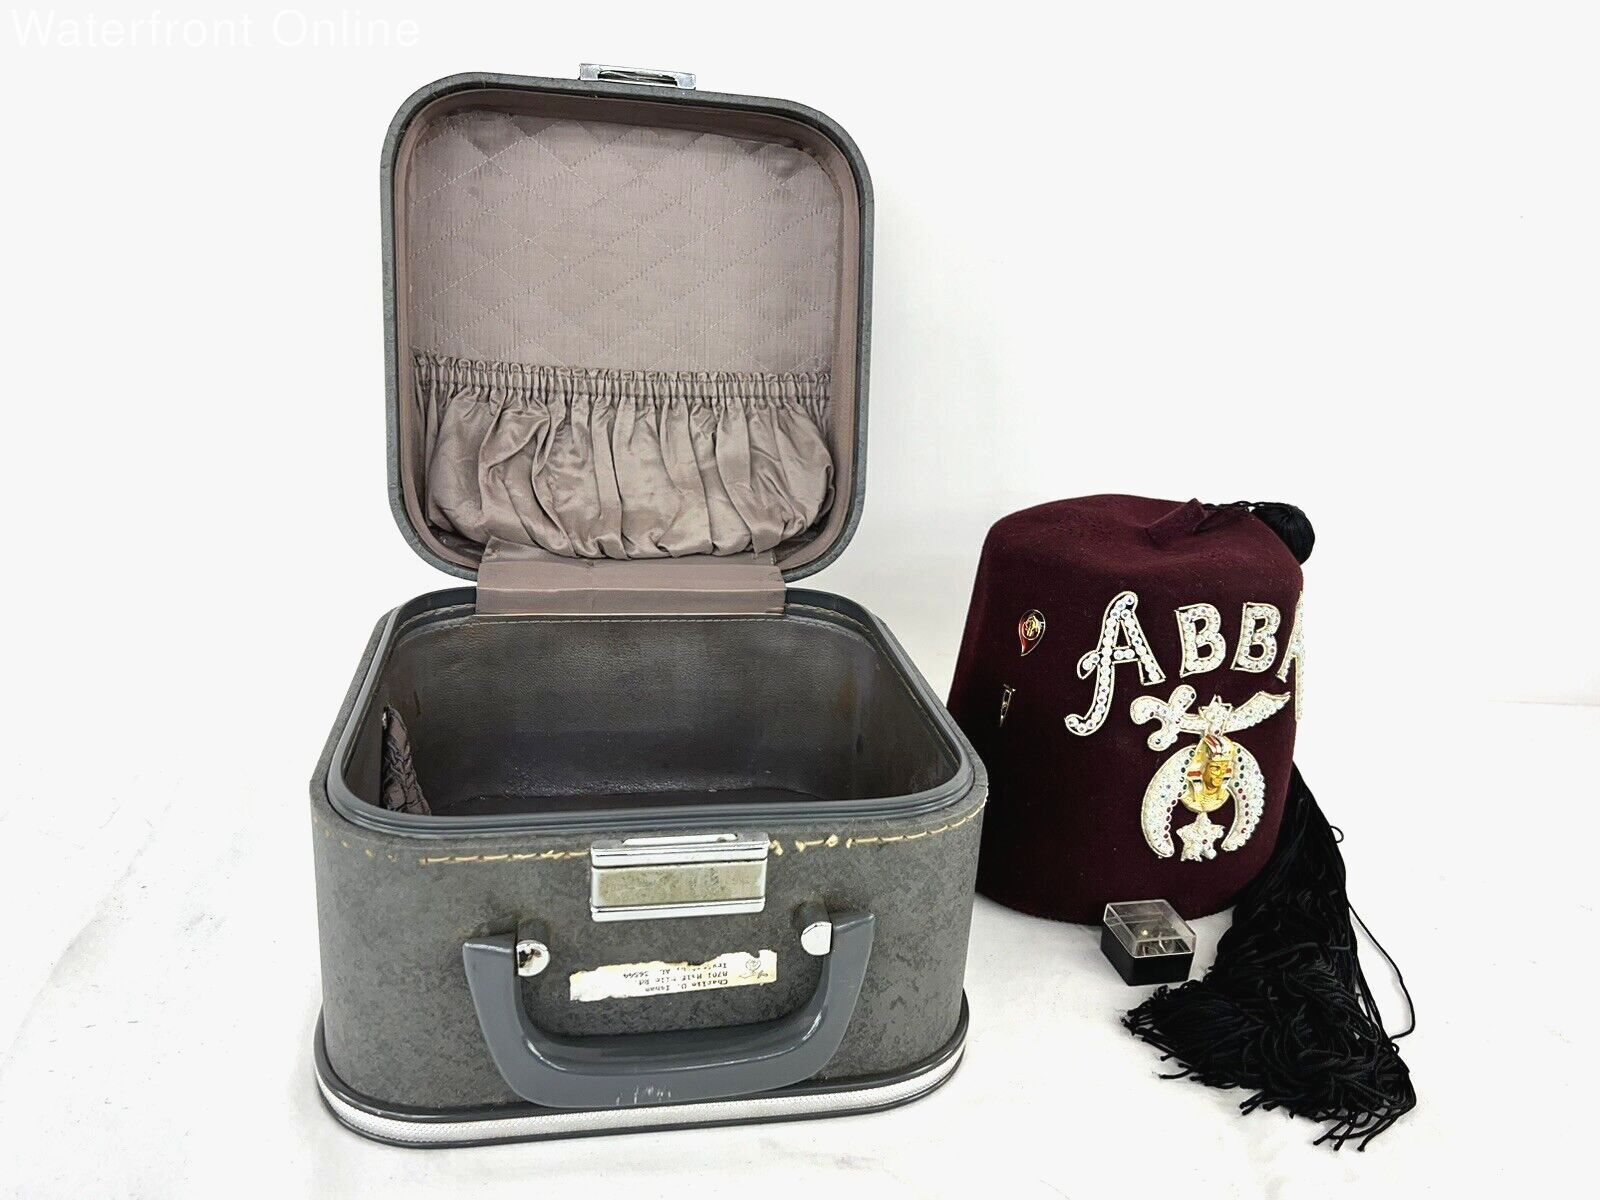 ABBA Shriners Jeweled Fez Hat Size 7-1/4